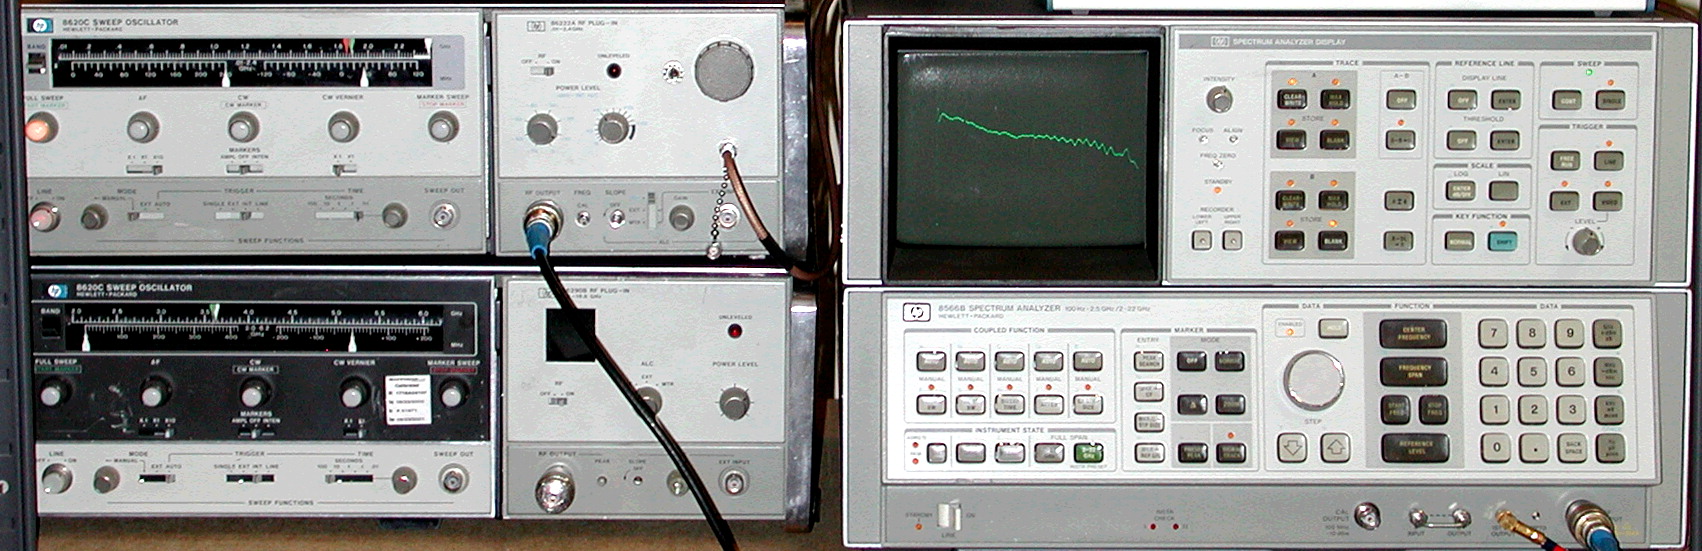 A 2 5 Ghz Tracking Generator For The Hp 8566a B Spectrum Analyzer